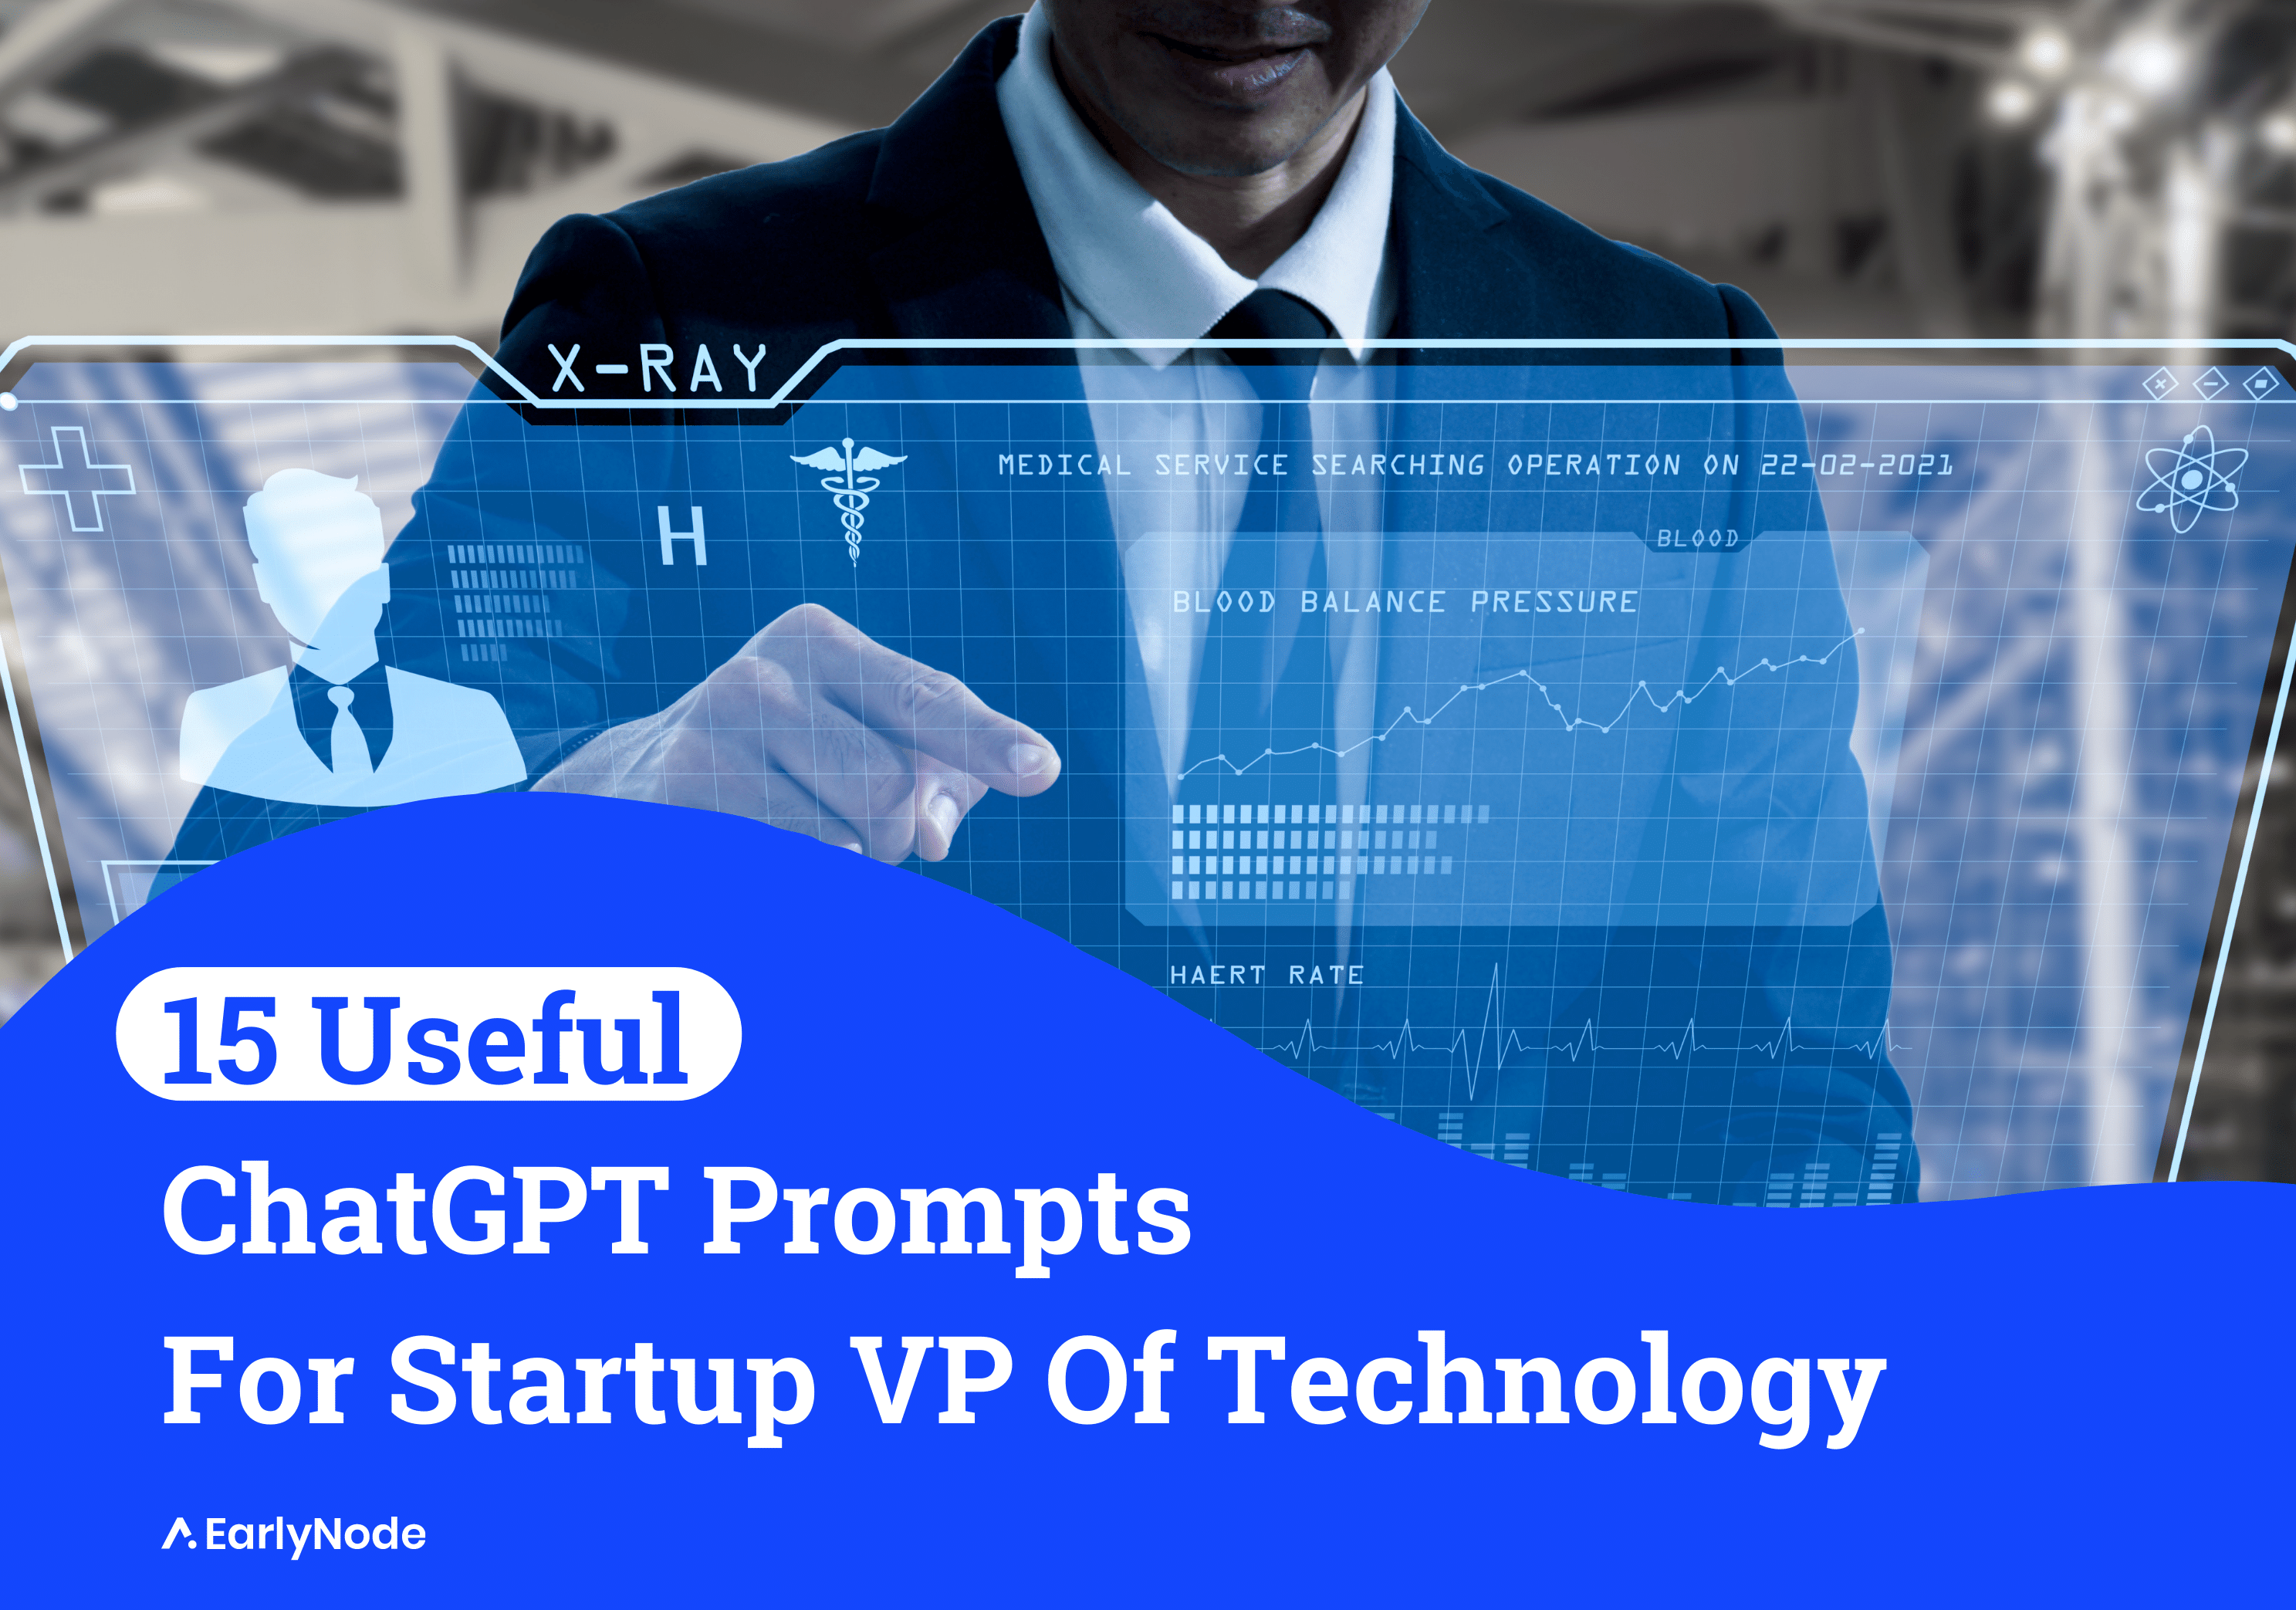 15 Technical ChatGPT Prompts For VP of Technology